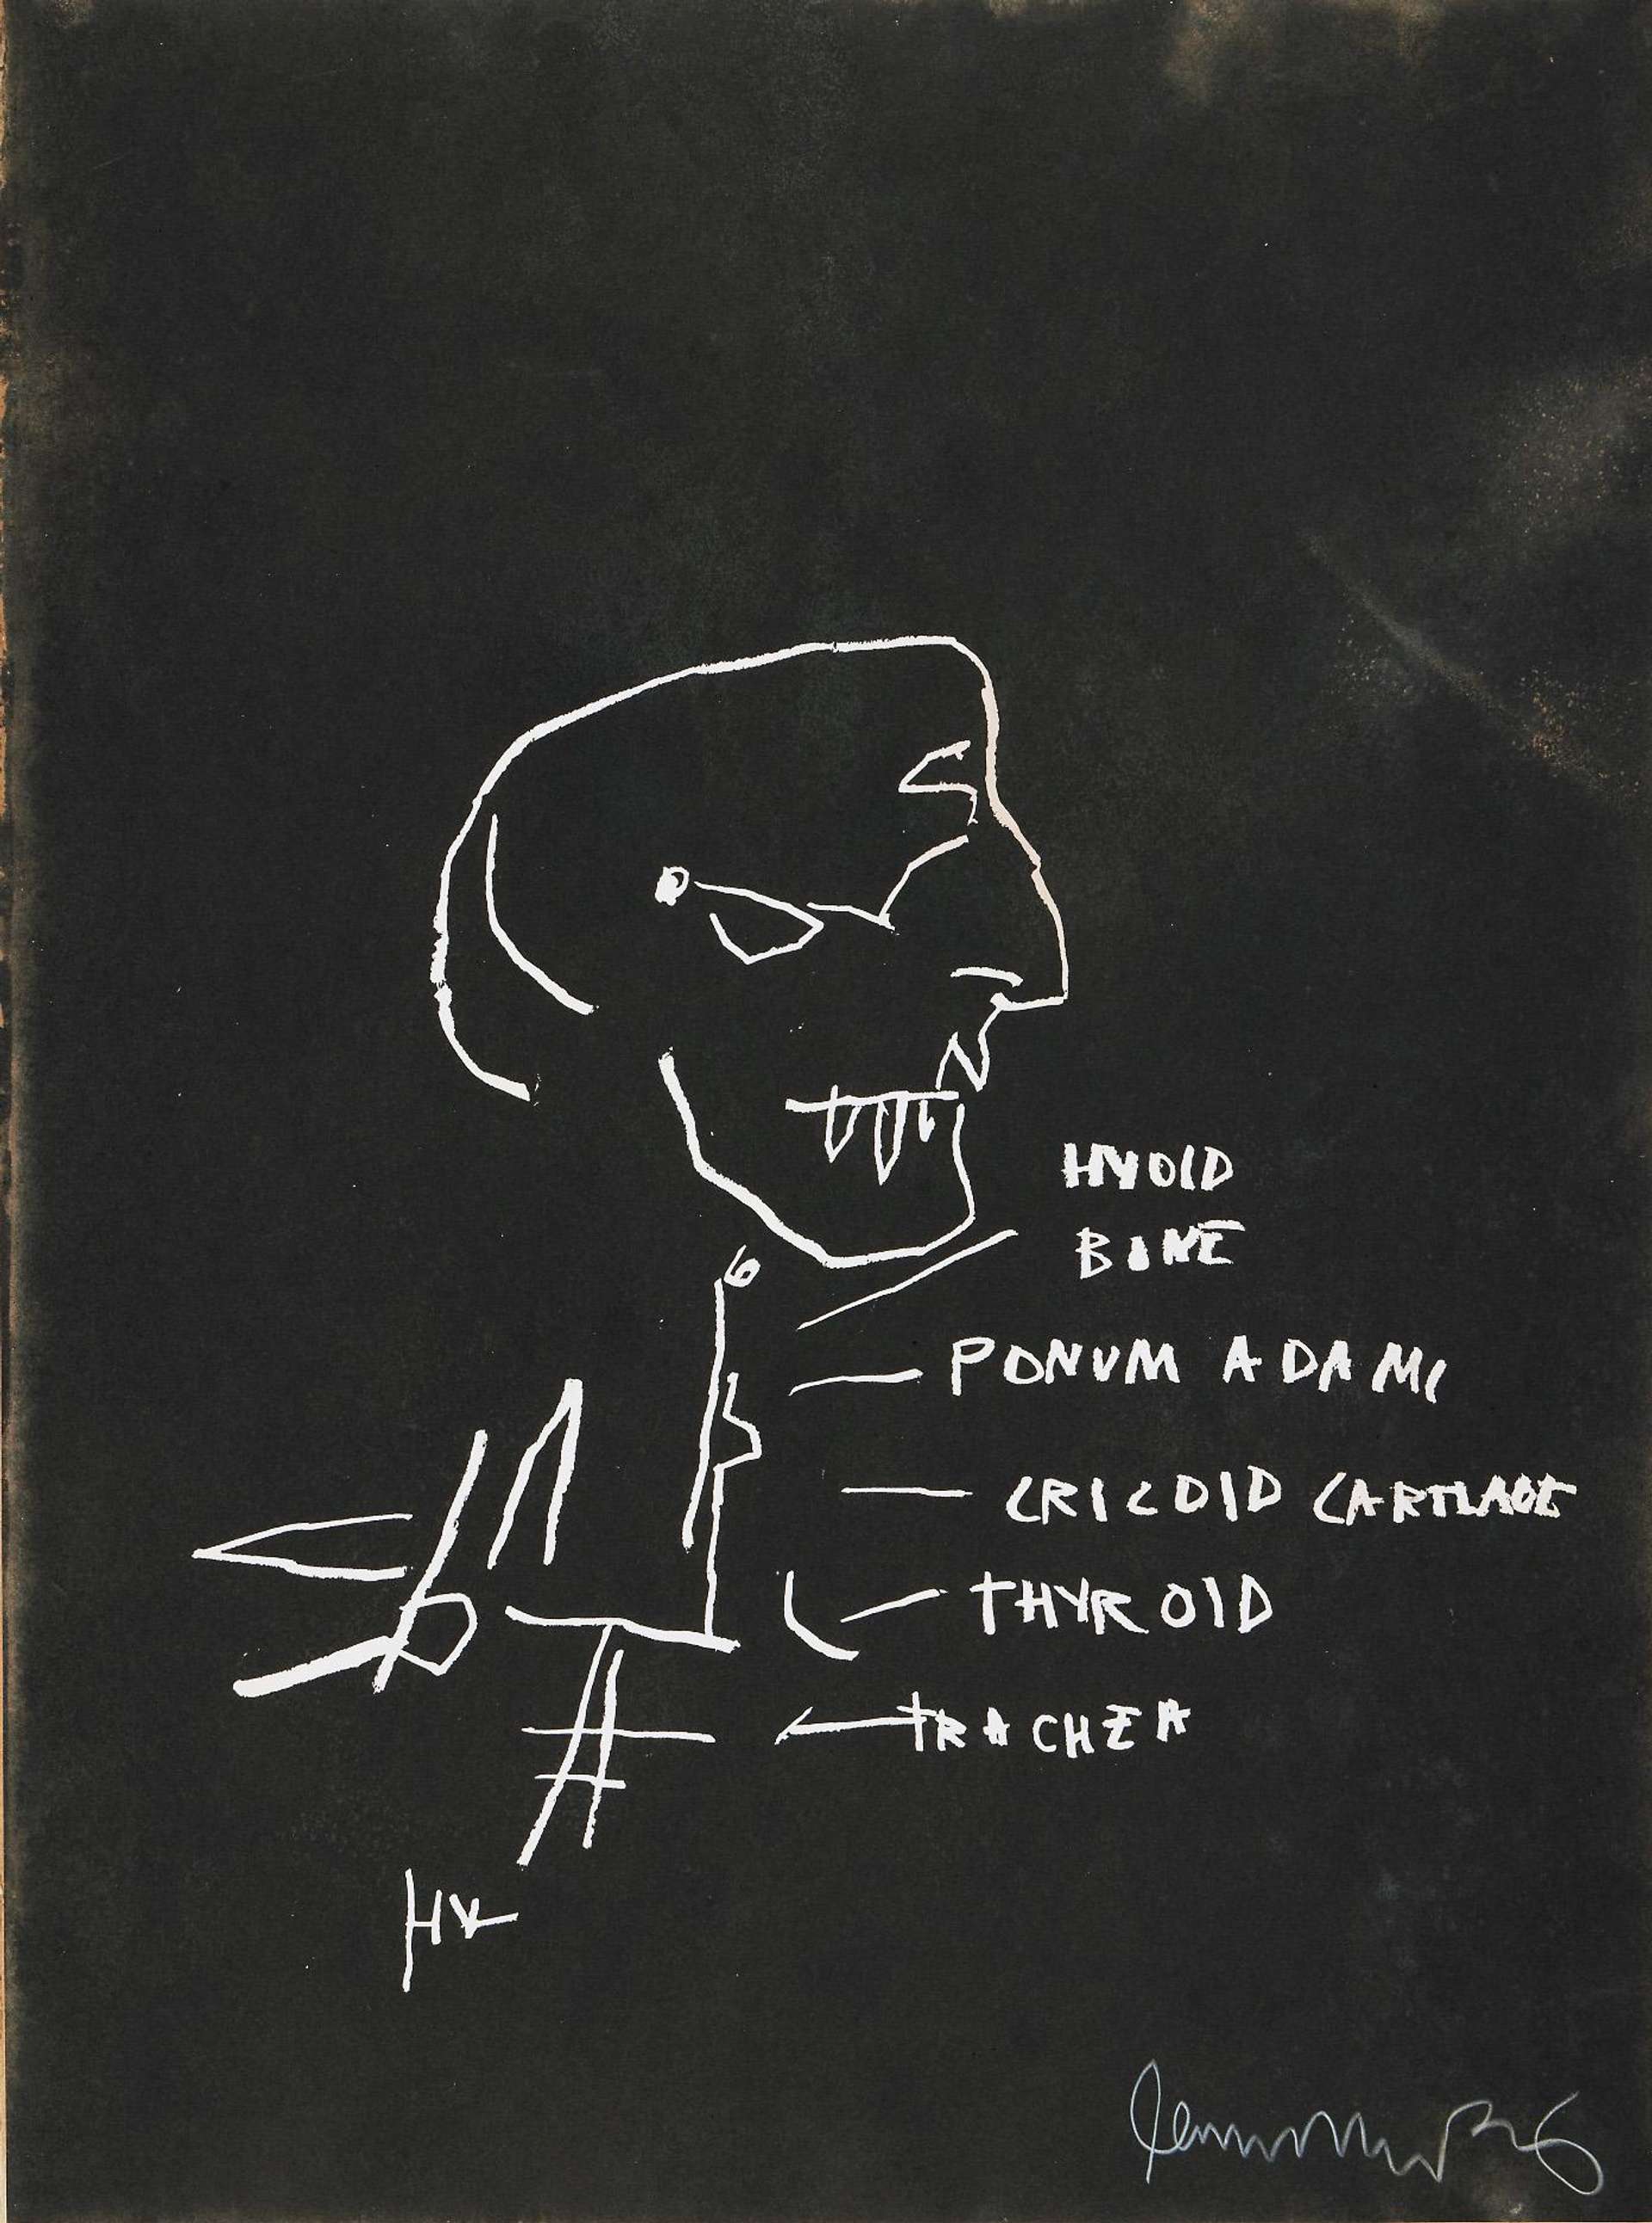 Jean-Michel Basquiat’s Anatomy, Thyroid. A black screenprint featuring white anatomical drawings of the side profile of a skull and neck with descriptive labels.